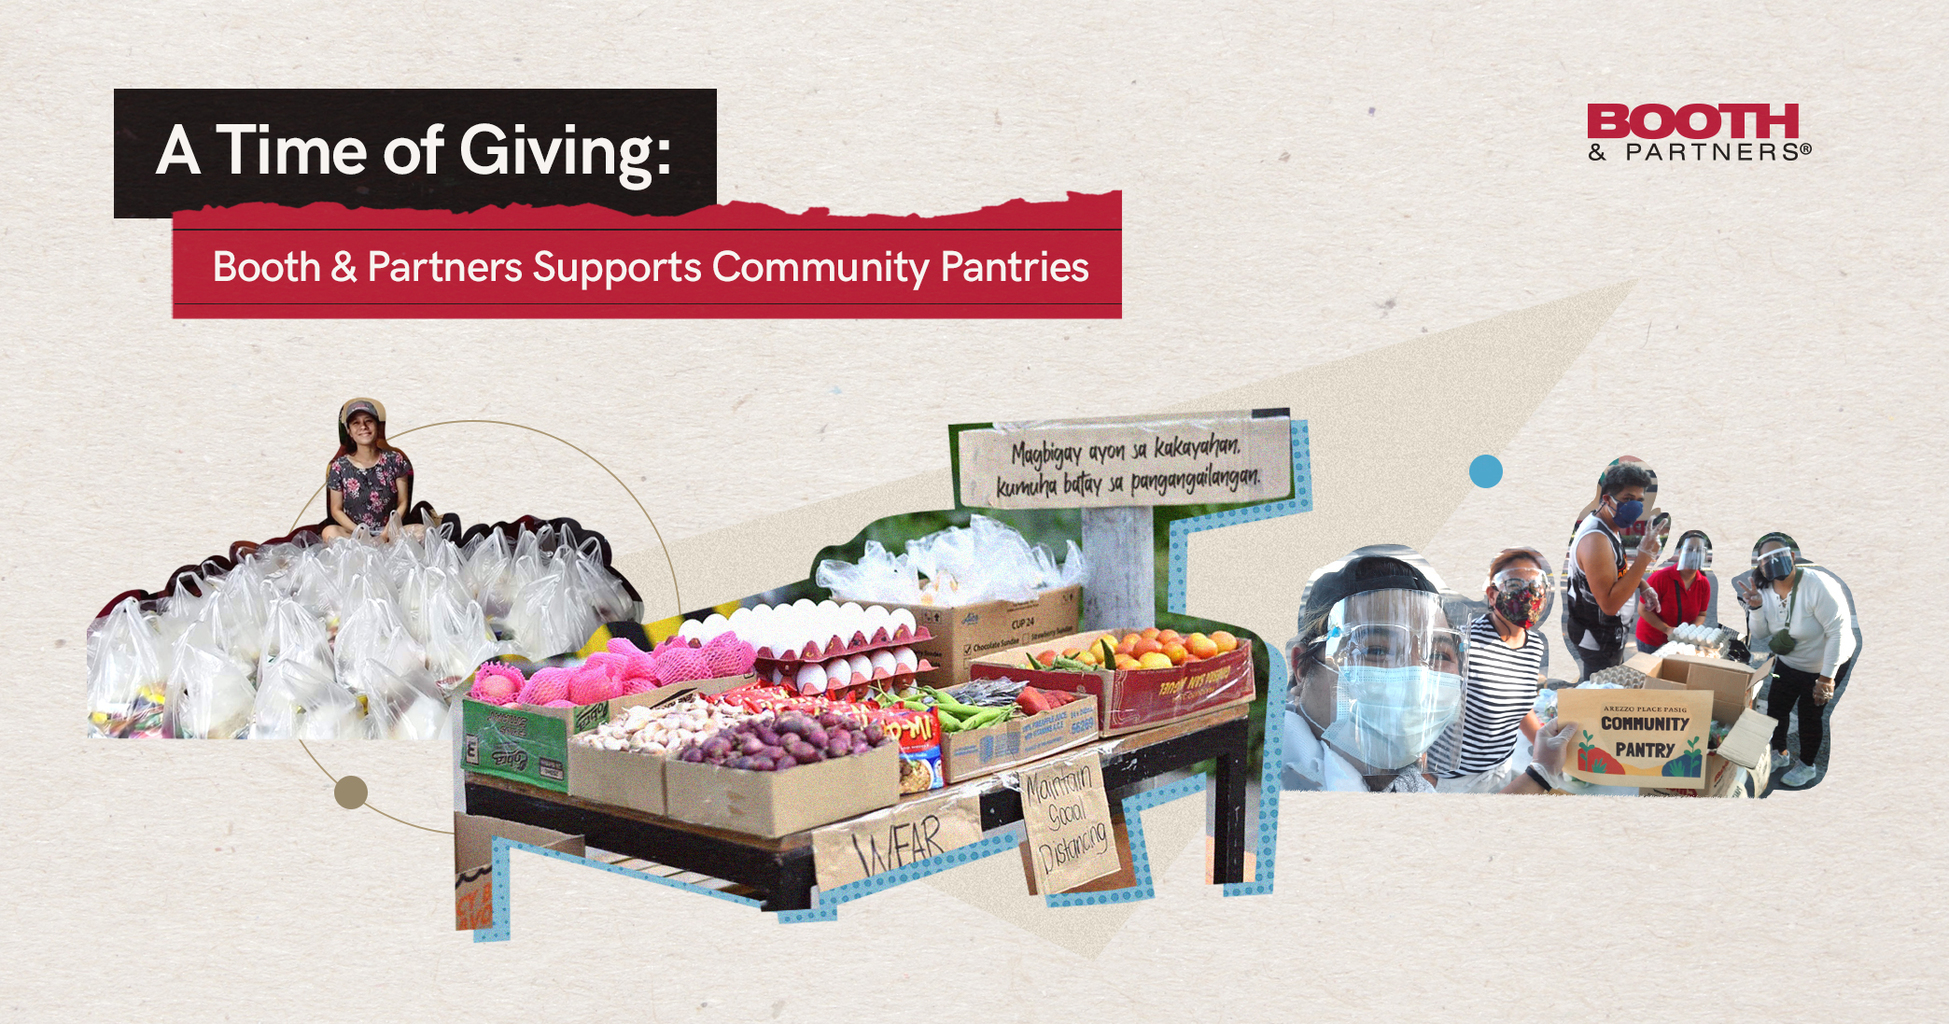 A Time of Giving: Booth & Partners Supports Community Pantries